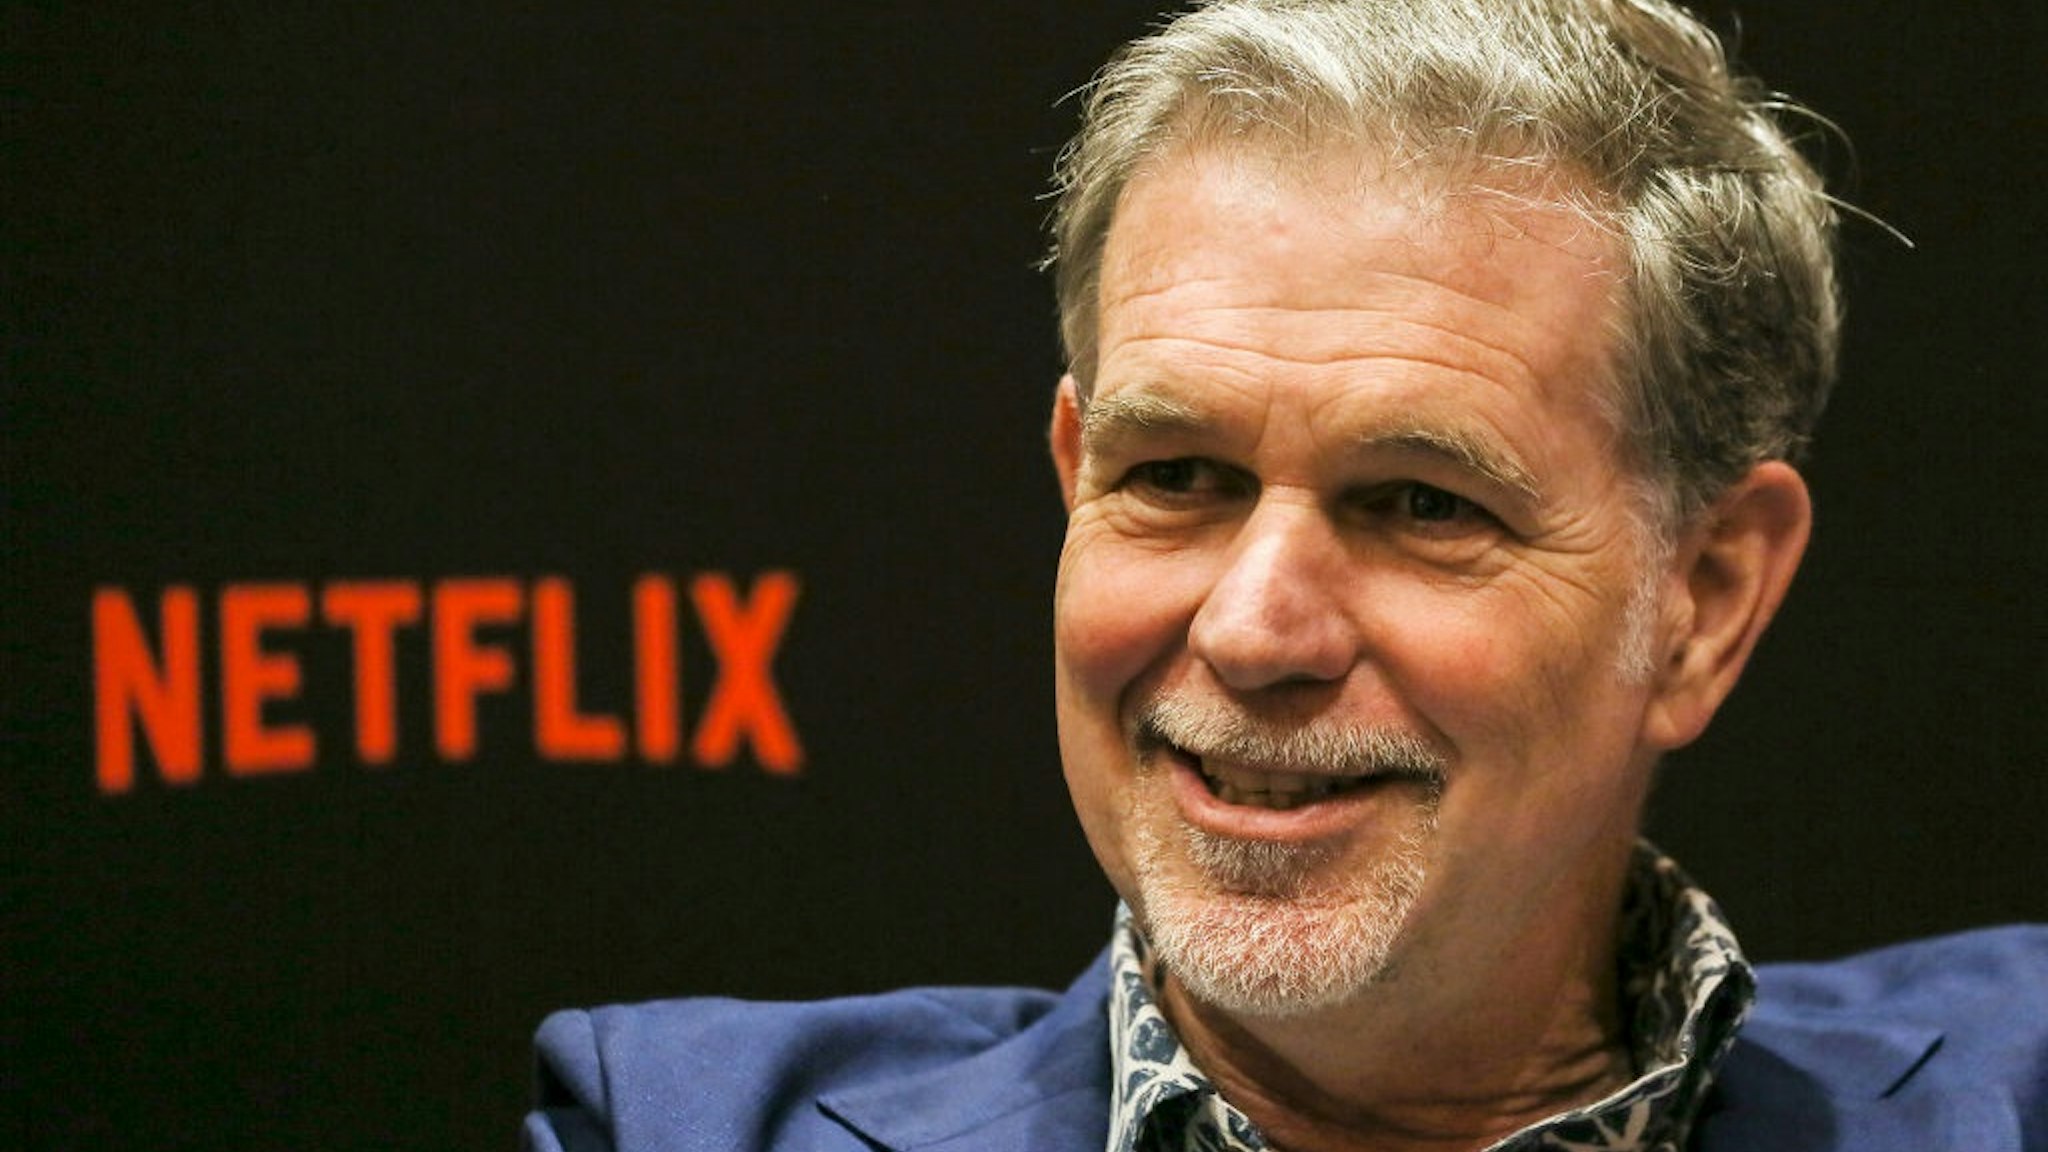 SINGAPORE - NOVEMBER 09: Netflix CEO Reed Hastings speaks during an interview on day two of the Netflix See What's Next: Asia event at the Marina Bay Sands on November 9, 2018 in Singapore.